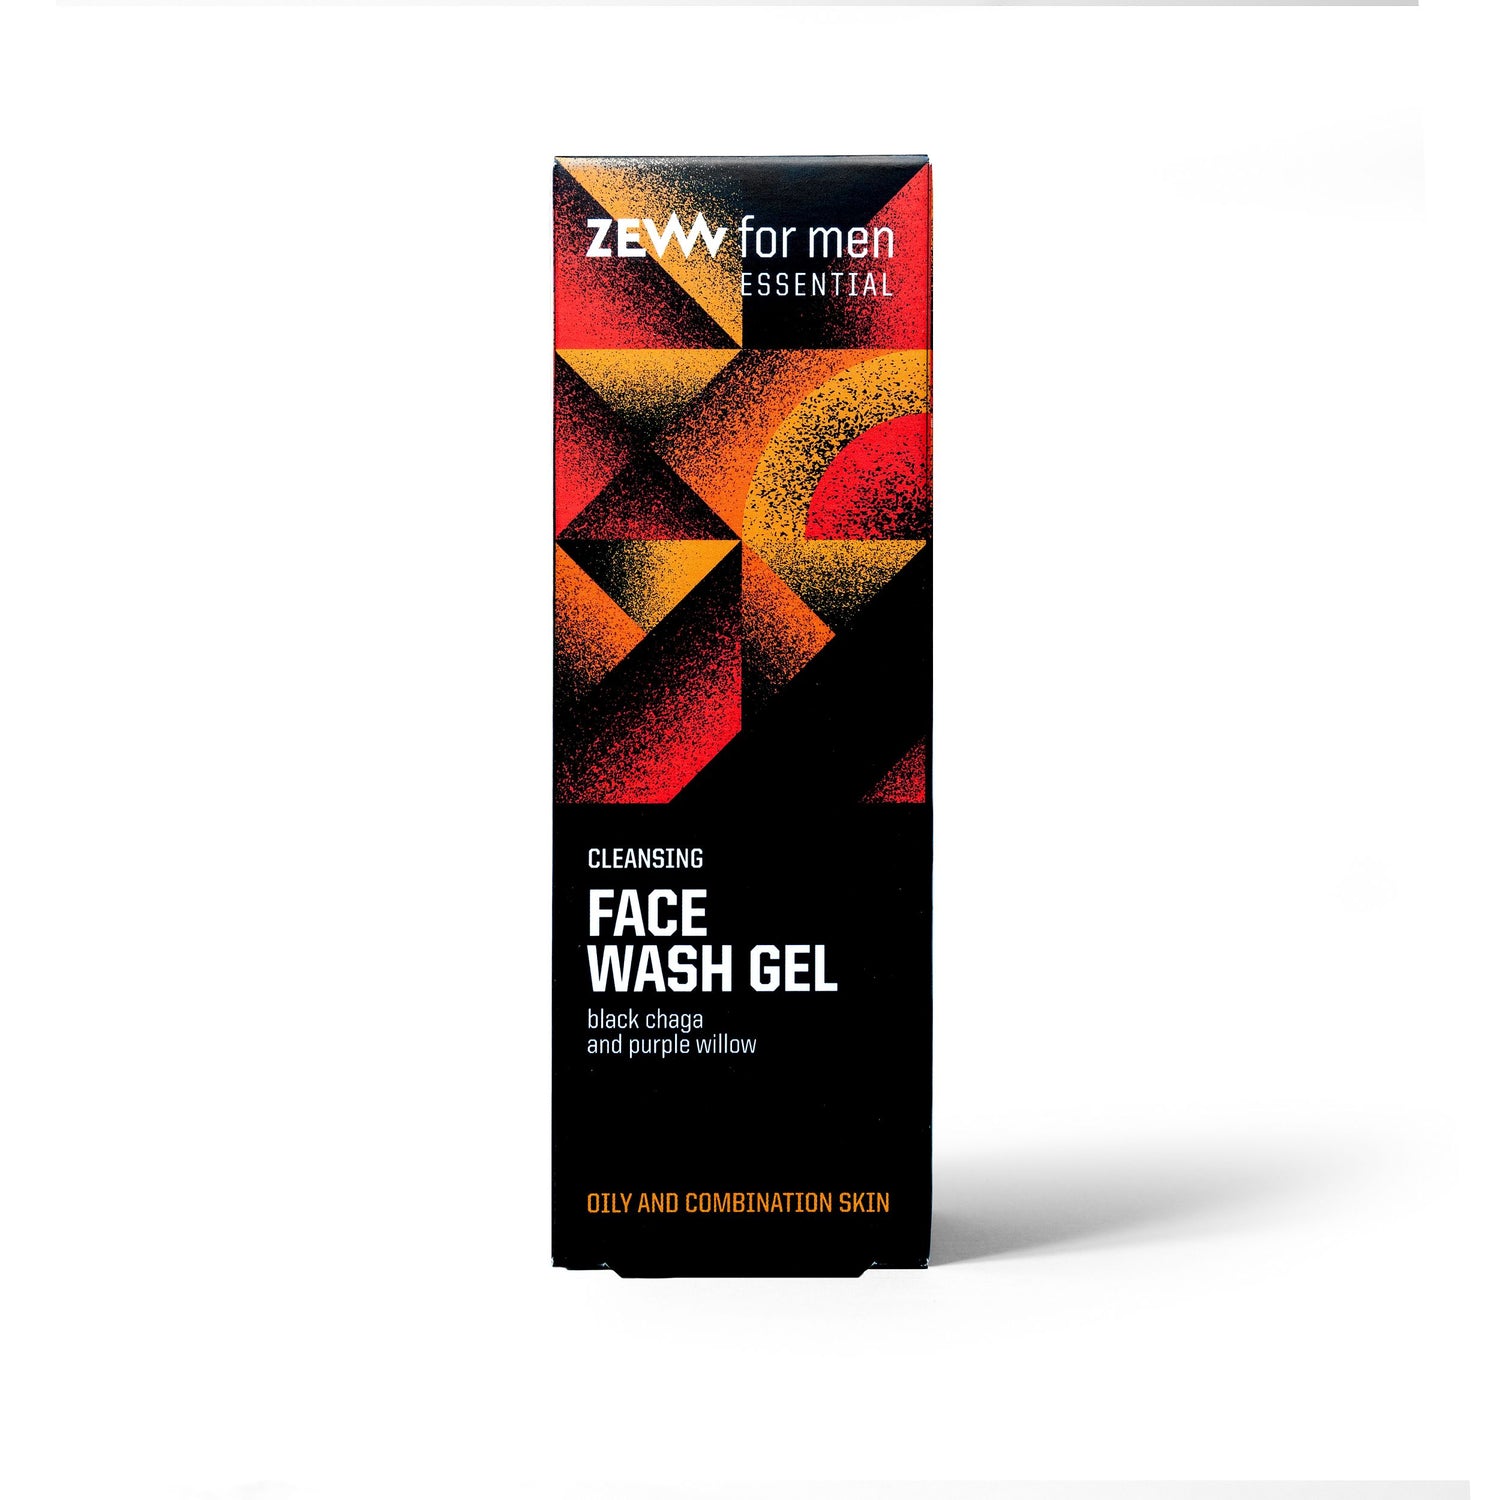 Face Wash Gel - Oily and combination skin 100ml